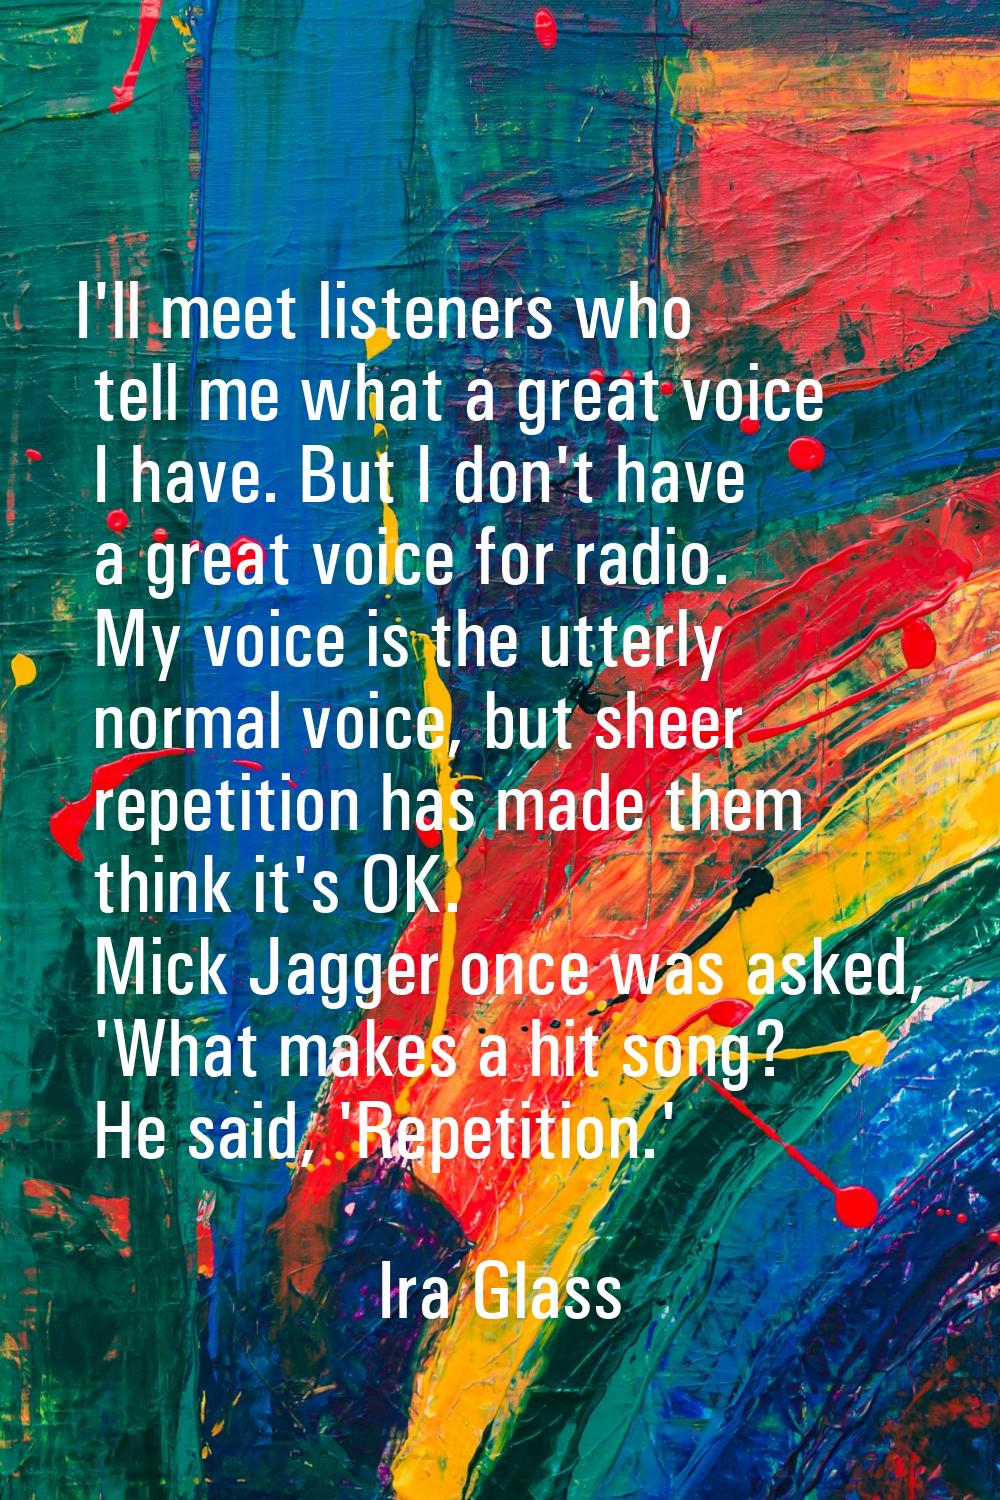 I'll meet listeners who tell me what a great voice I have. But I don't have a great voice for radio